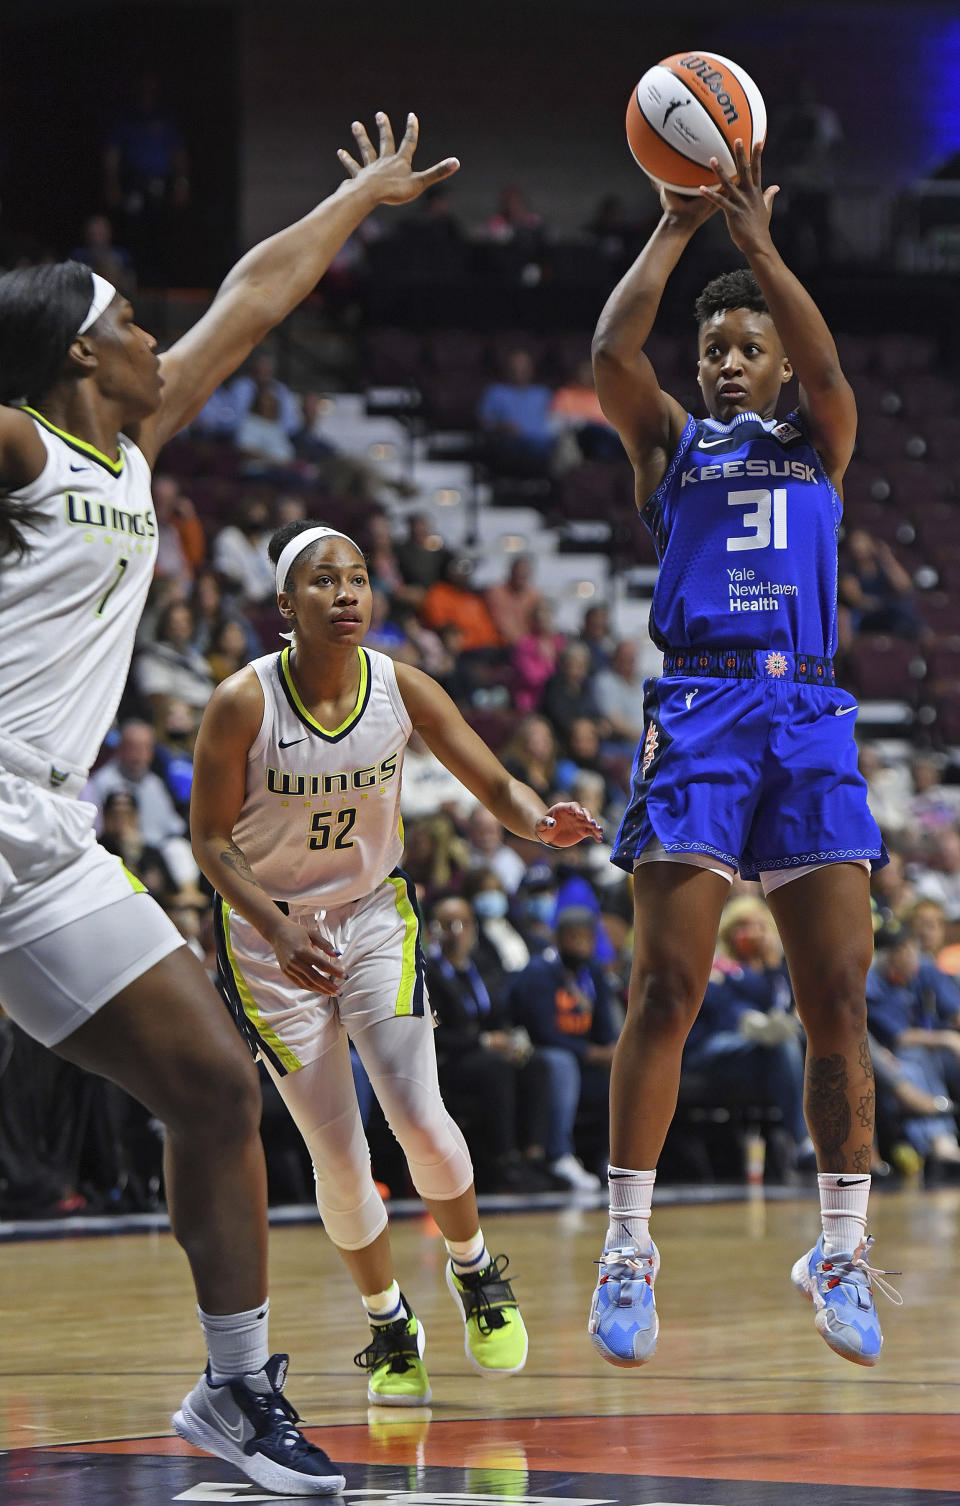 onnecticut Sun guard Yvonne Anderson (31) shoots over Dallas Wings center Teaira McCowan (7) during the first half of a WNBA basketball game Tuesday, May 24, 2022 at Mohegan Sun Arena in Uncasville, Conn. (Sean D. Elliot/The Day via AP)